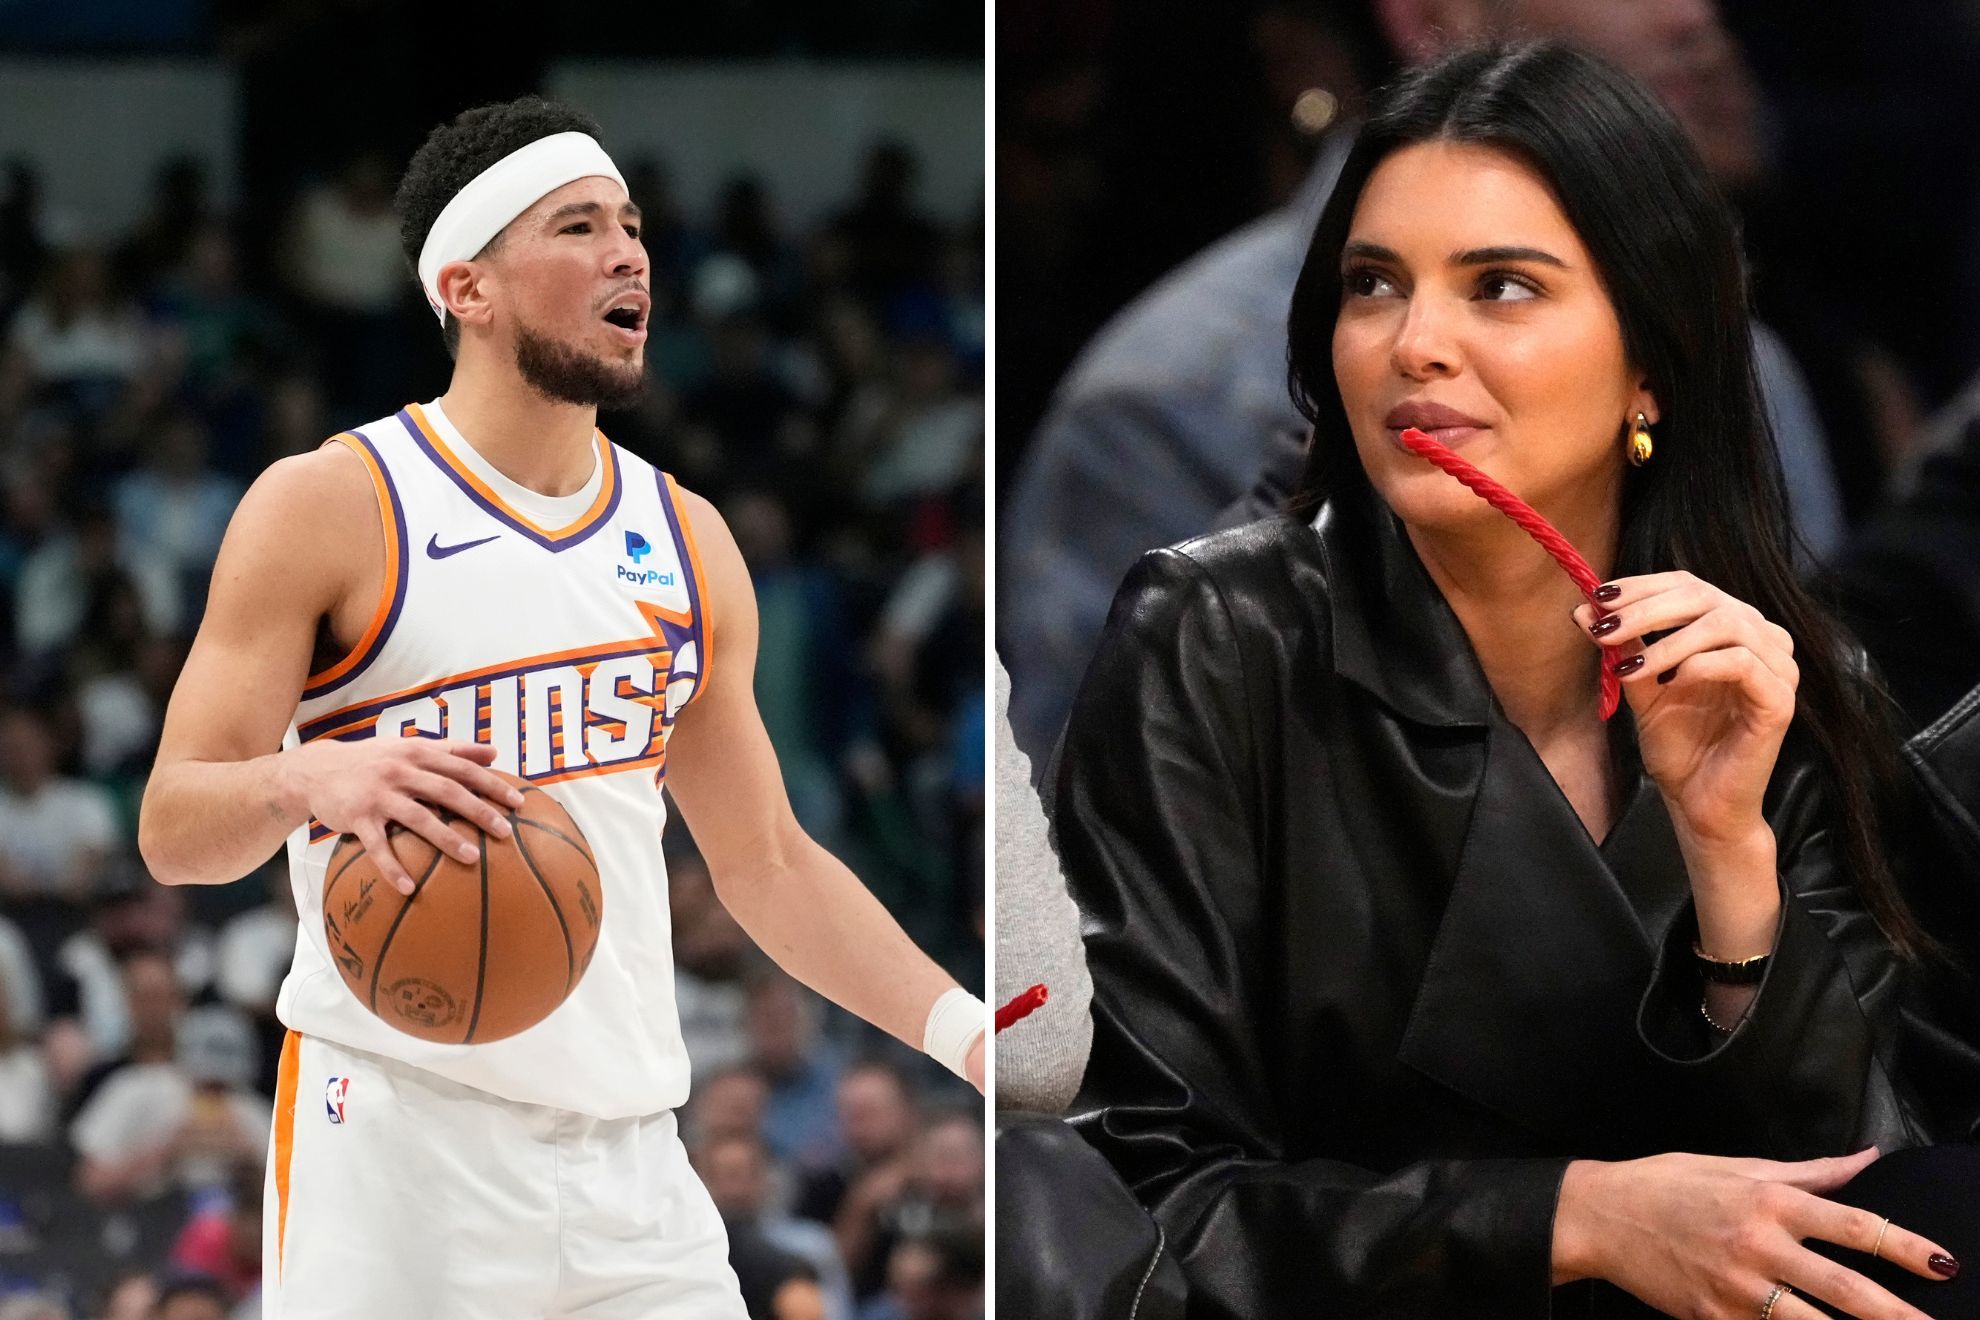 Kendall Jenner is seeing Devin Booker again after breaking up with Bad Bunny